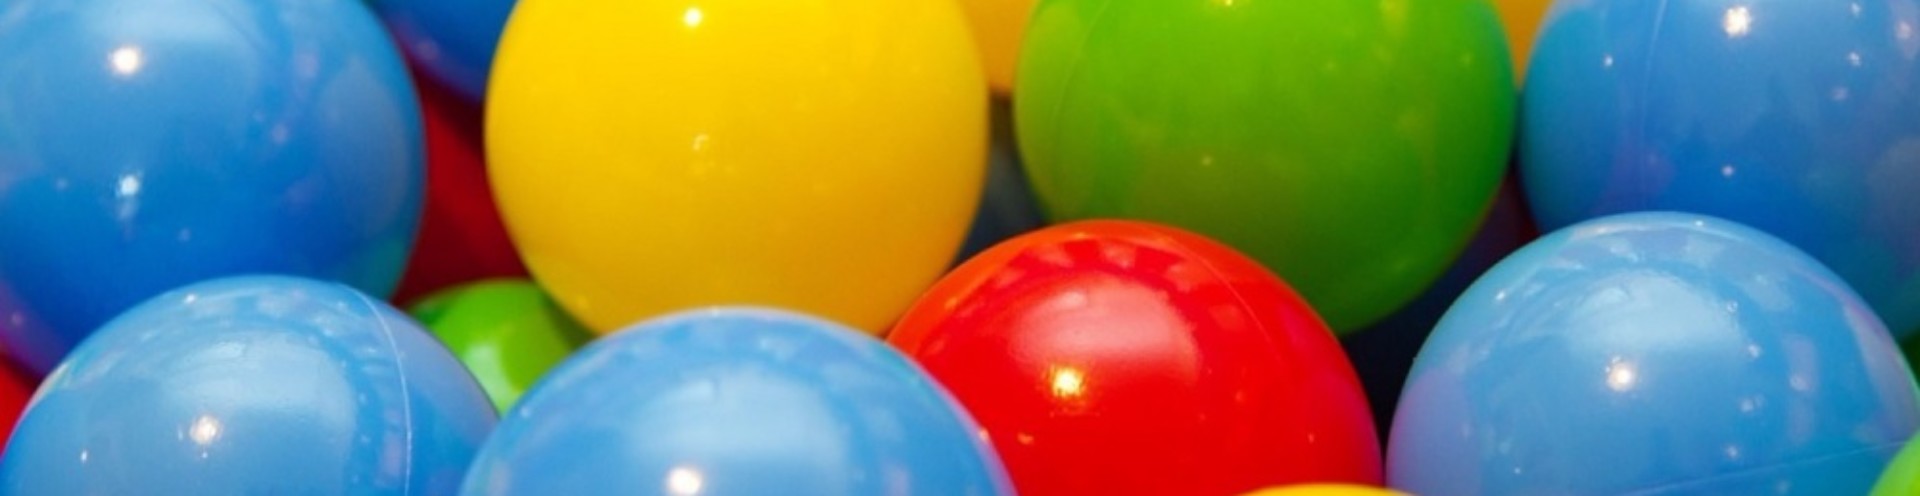 Colourful balls from The community ball pool event.